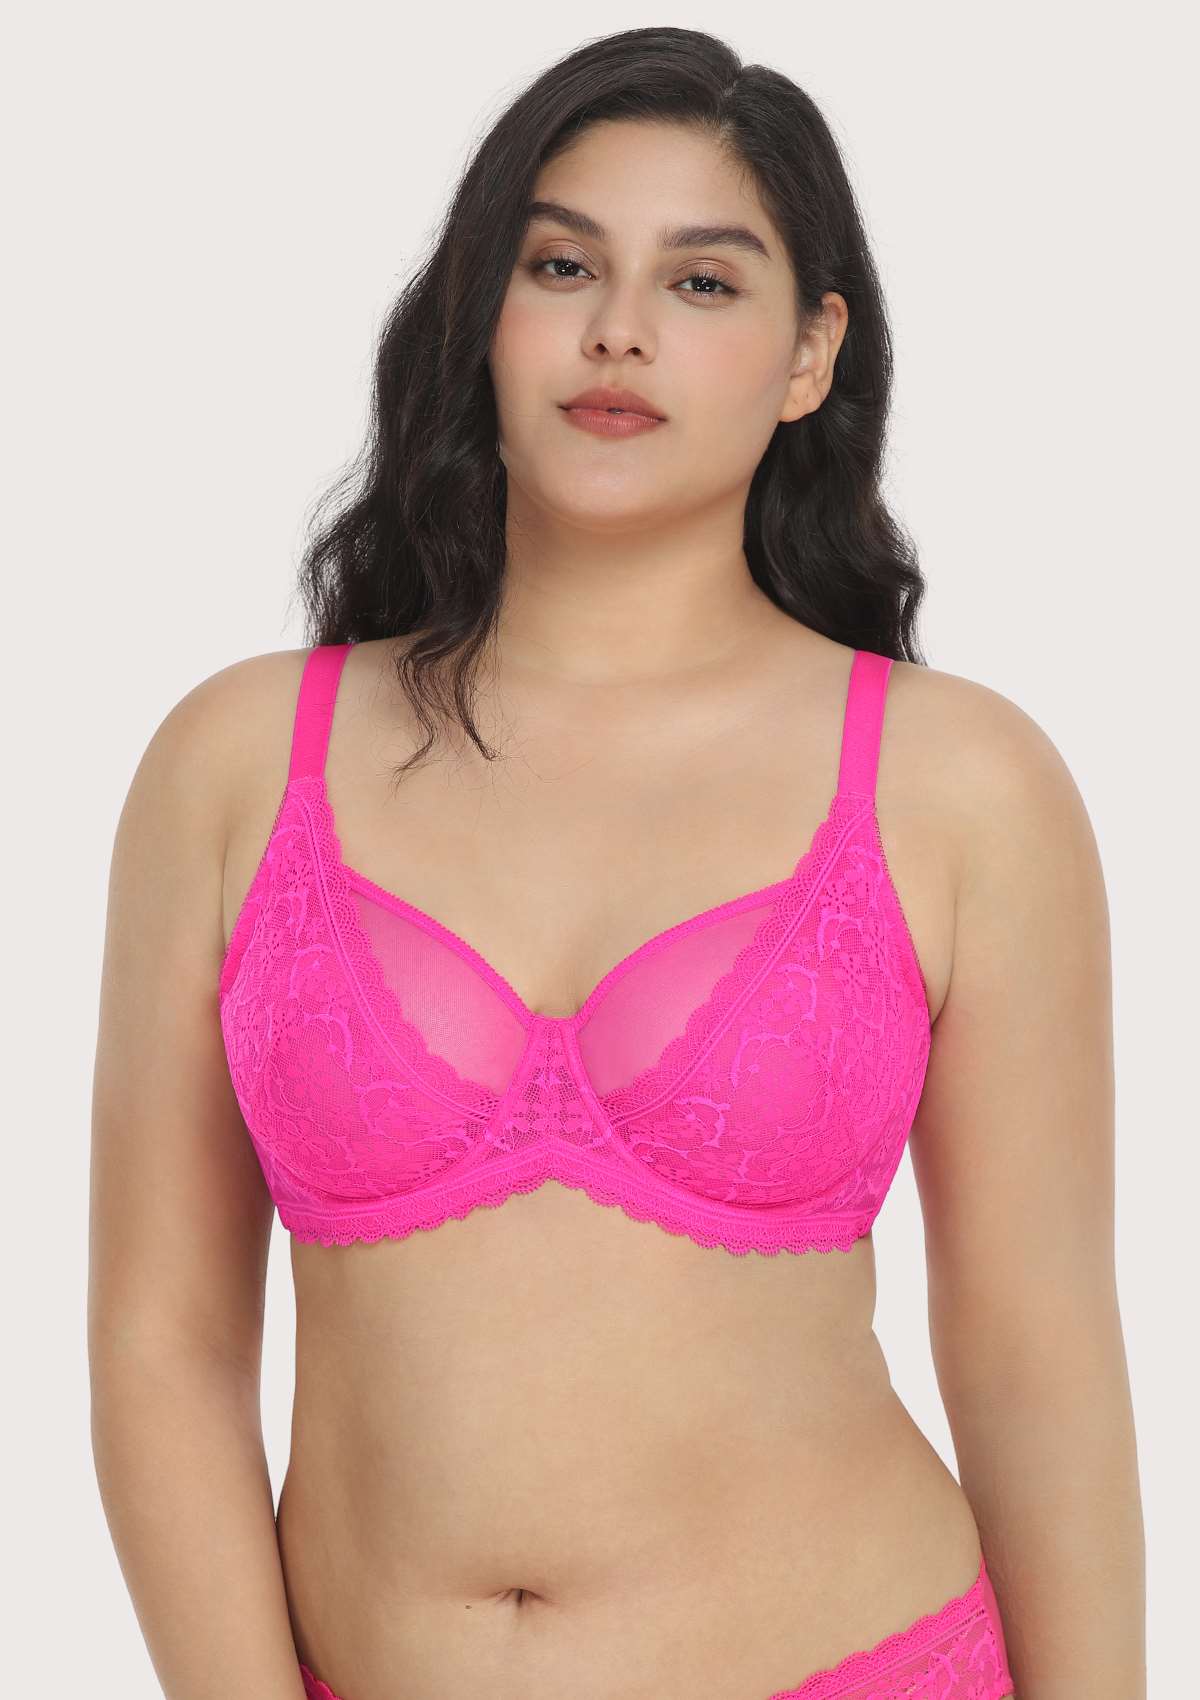 HSIA Anemone Lace Unlined Bra: Supportive, Lightweight Bra - Ginger / 34 / DDD/F